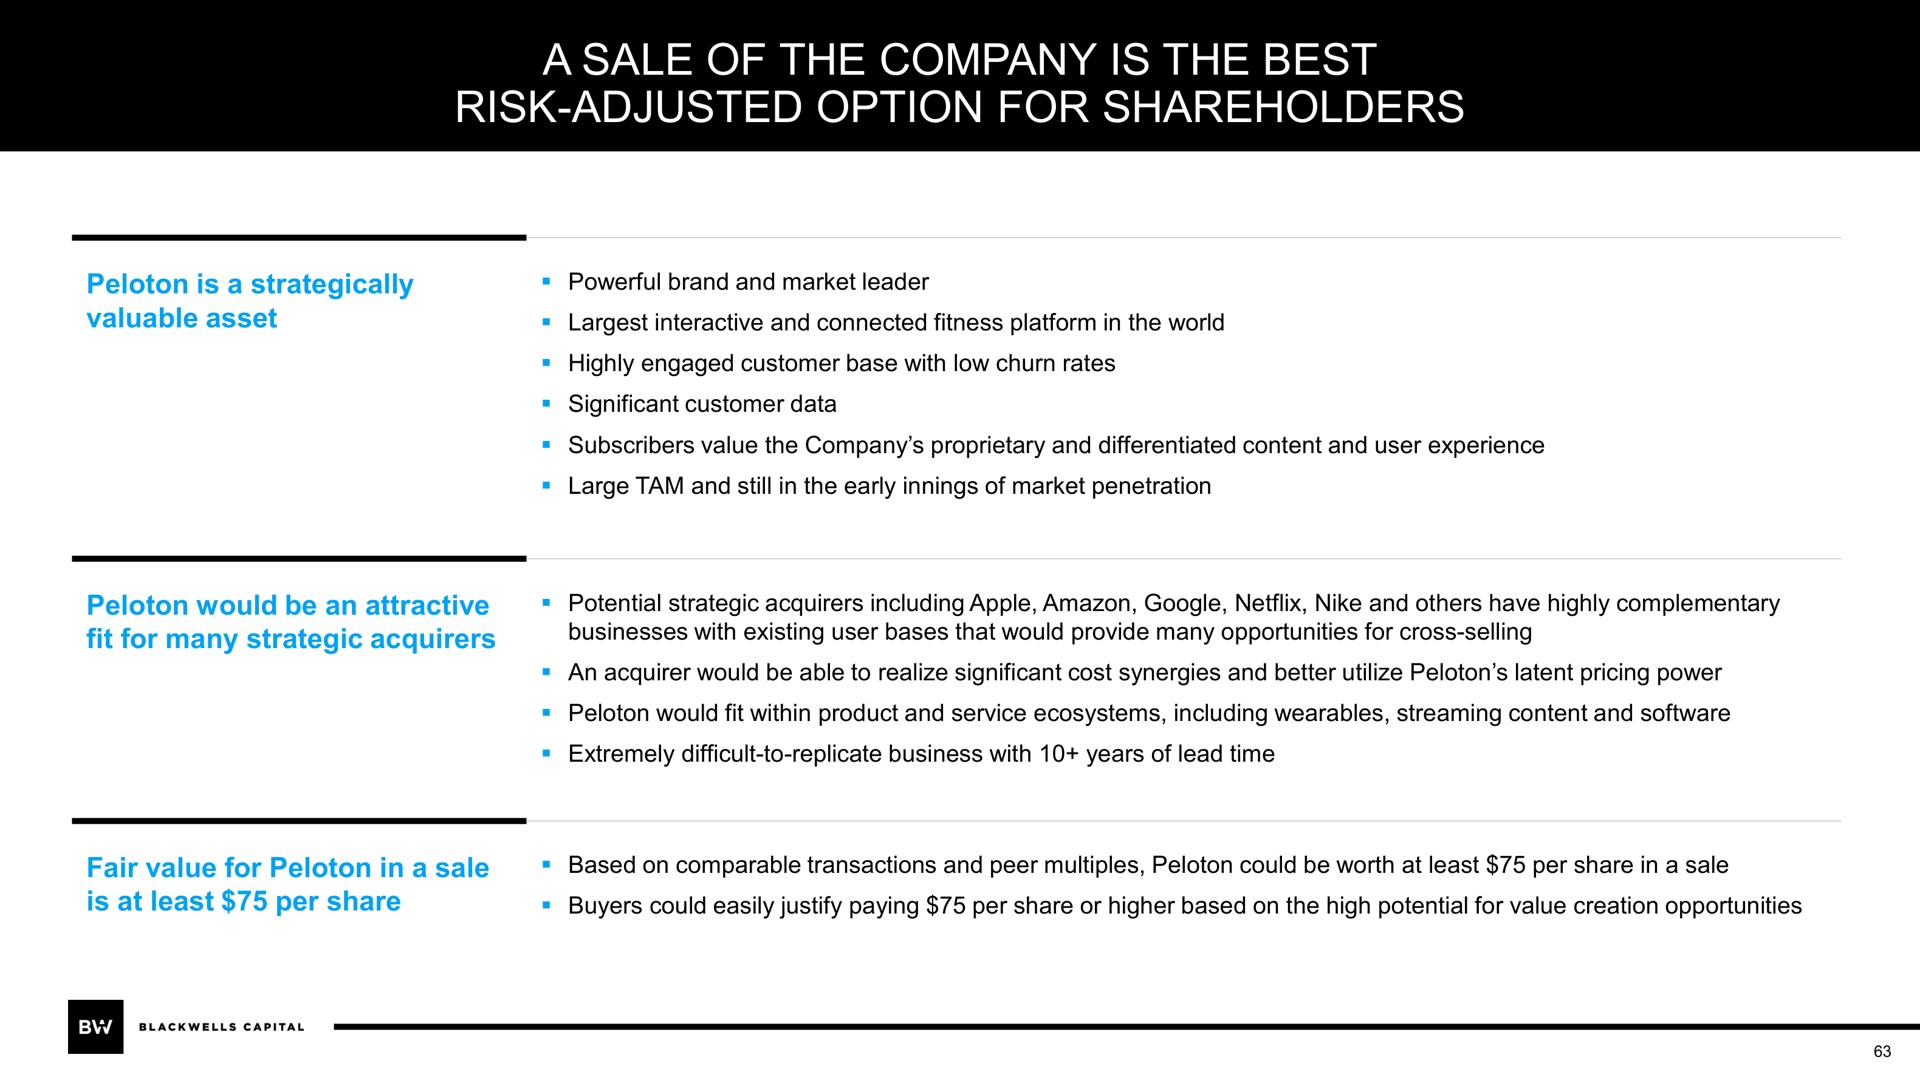 a sale of the company is the best risk adjusted option for shareholders | Blackwells Capital